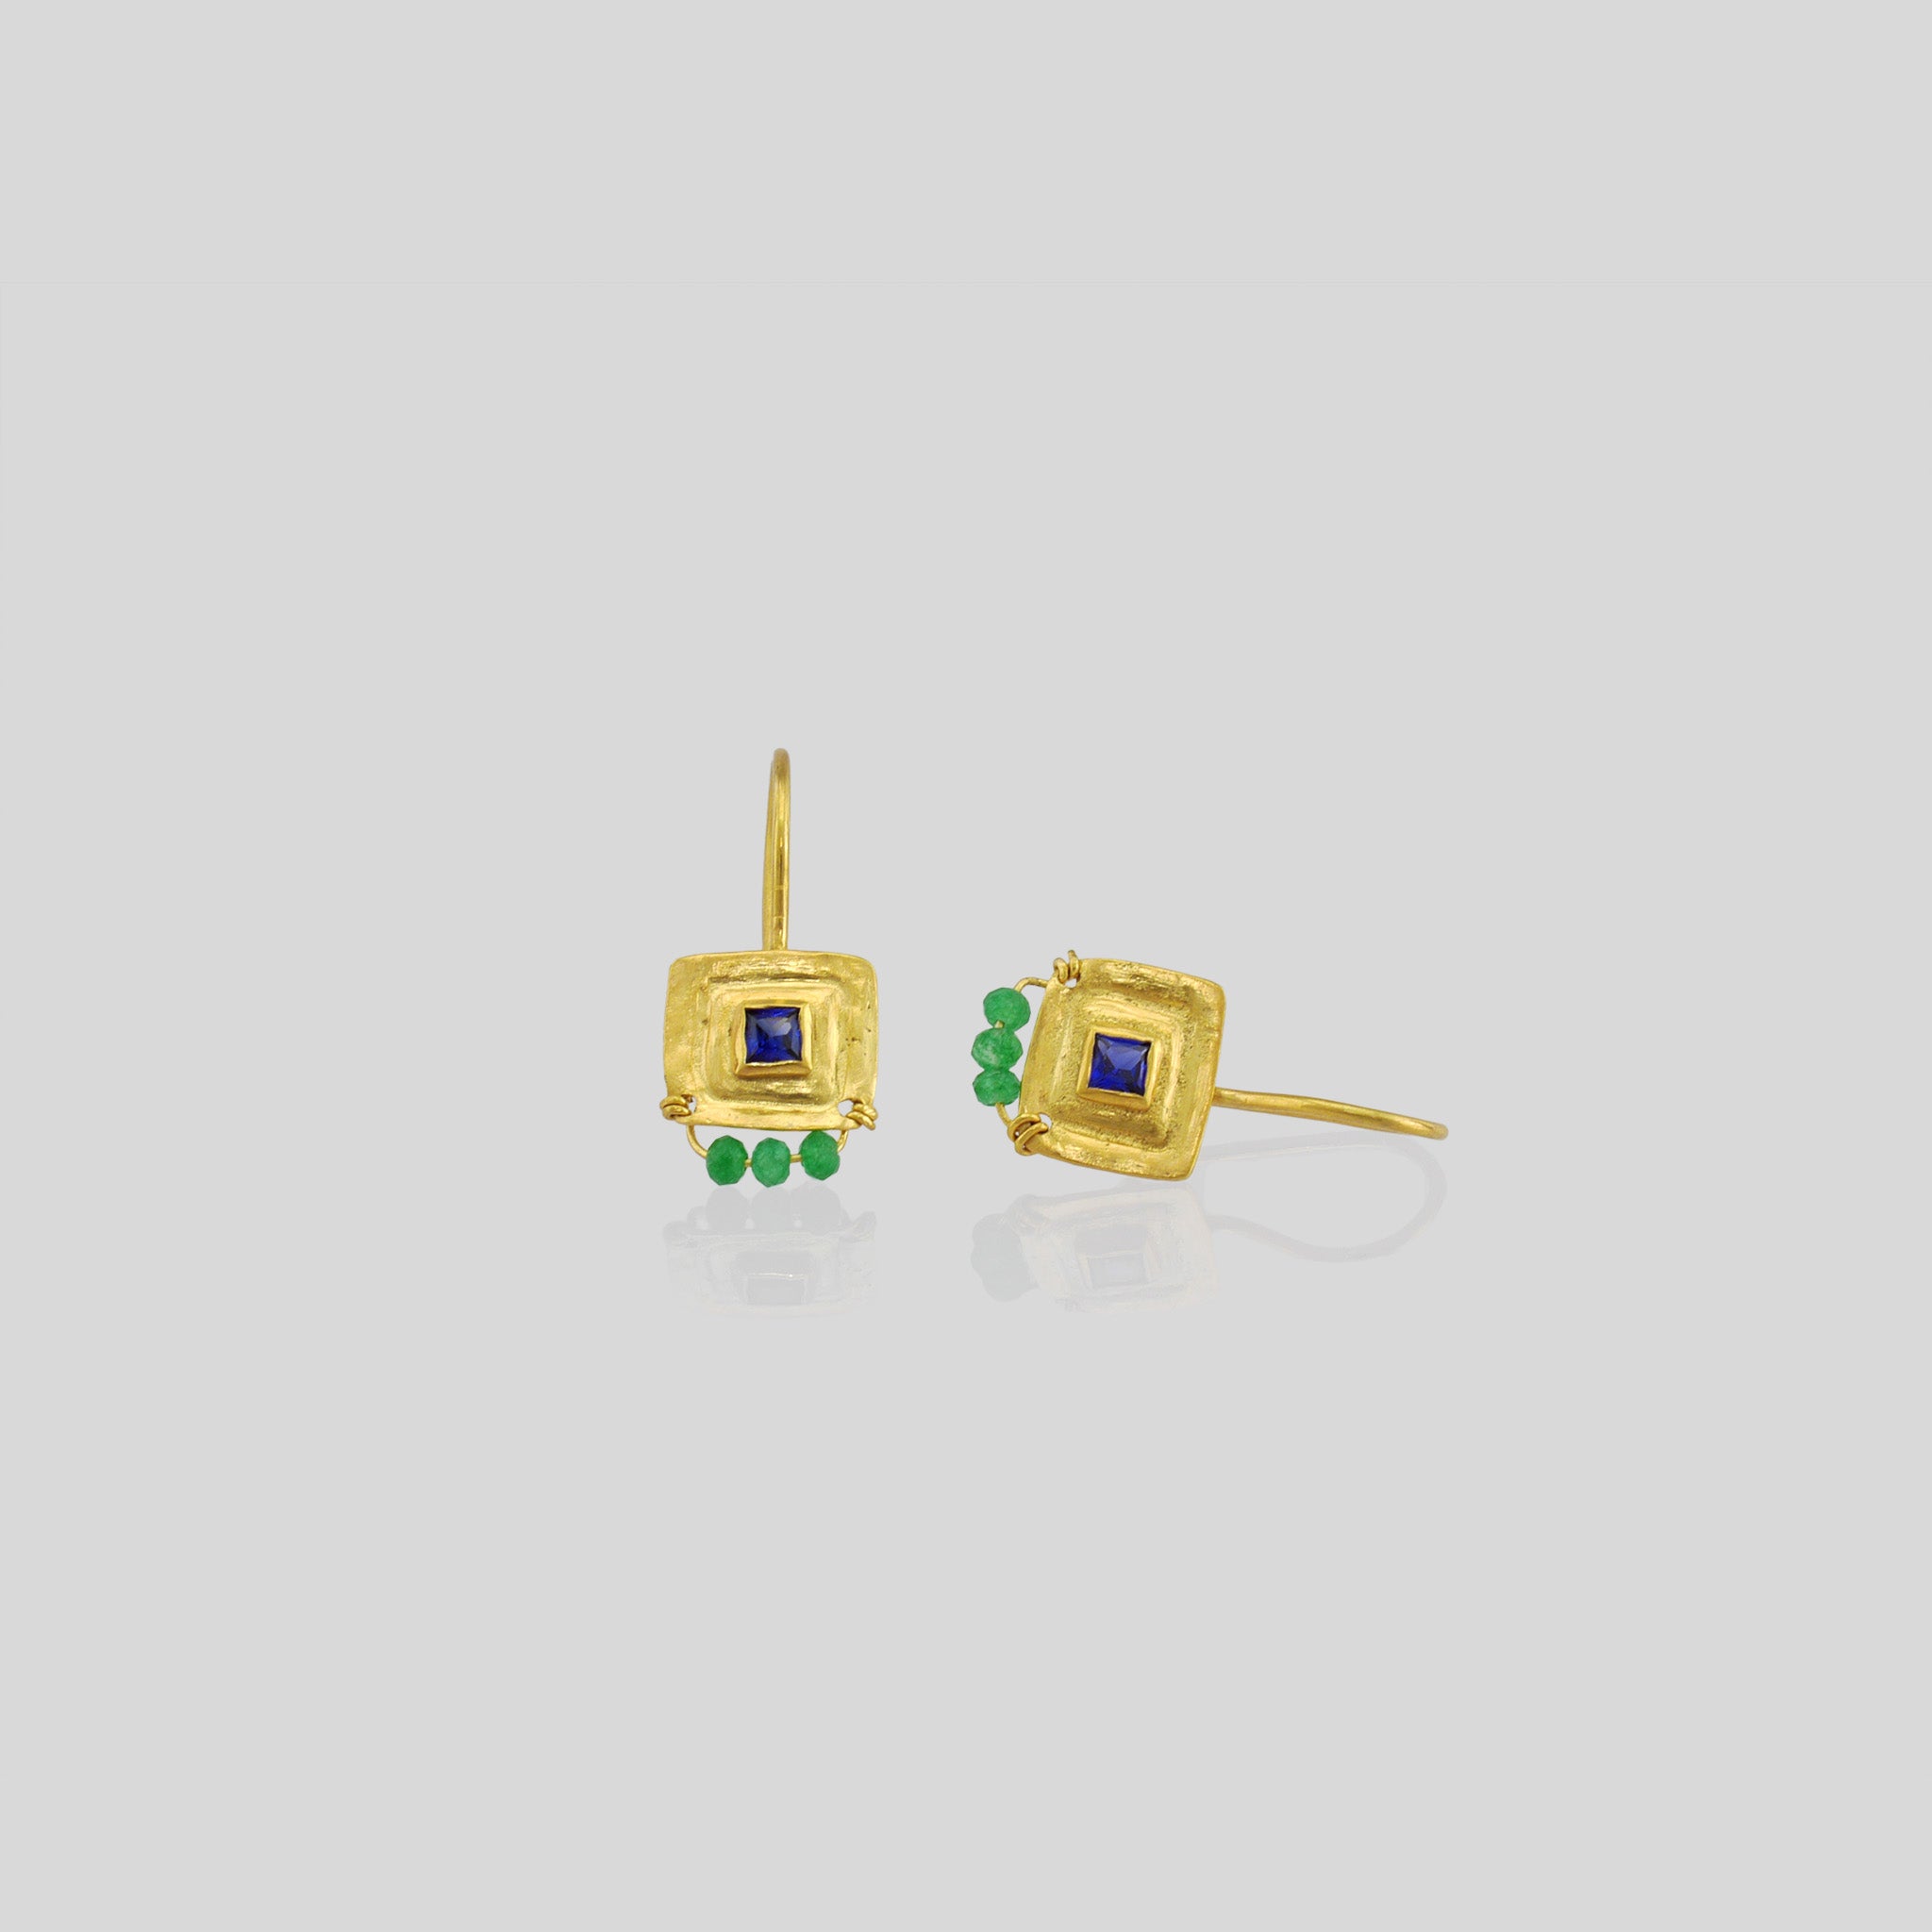 Pharaohs - Gold square drop earrings with square sapphire gemstone, handmade square pattern, and three hand-woven Emerald beads for an elegant Egyptian vibe.